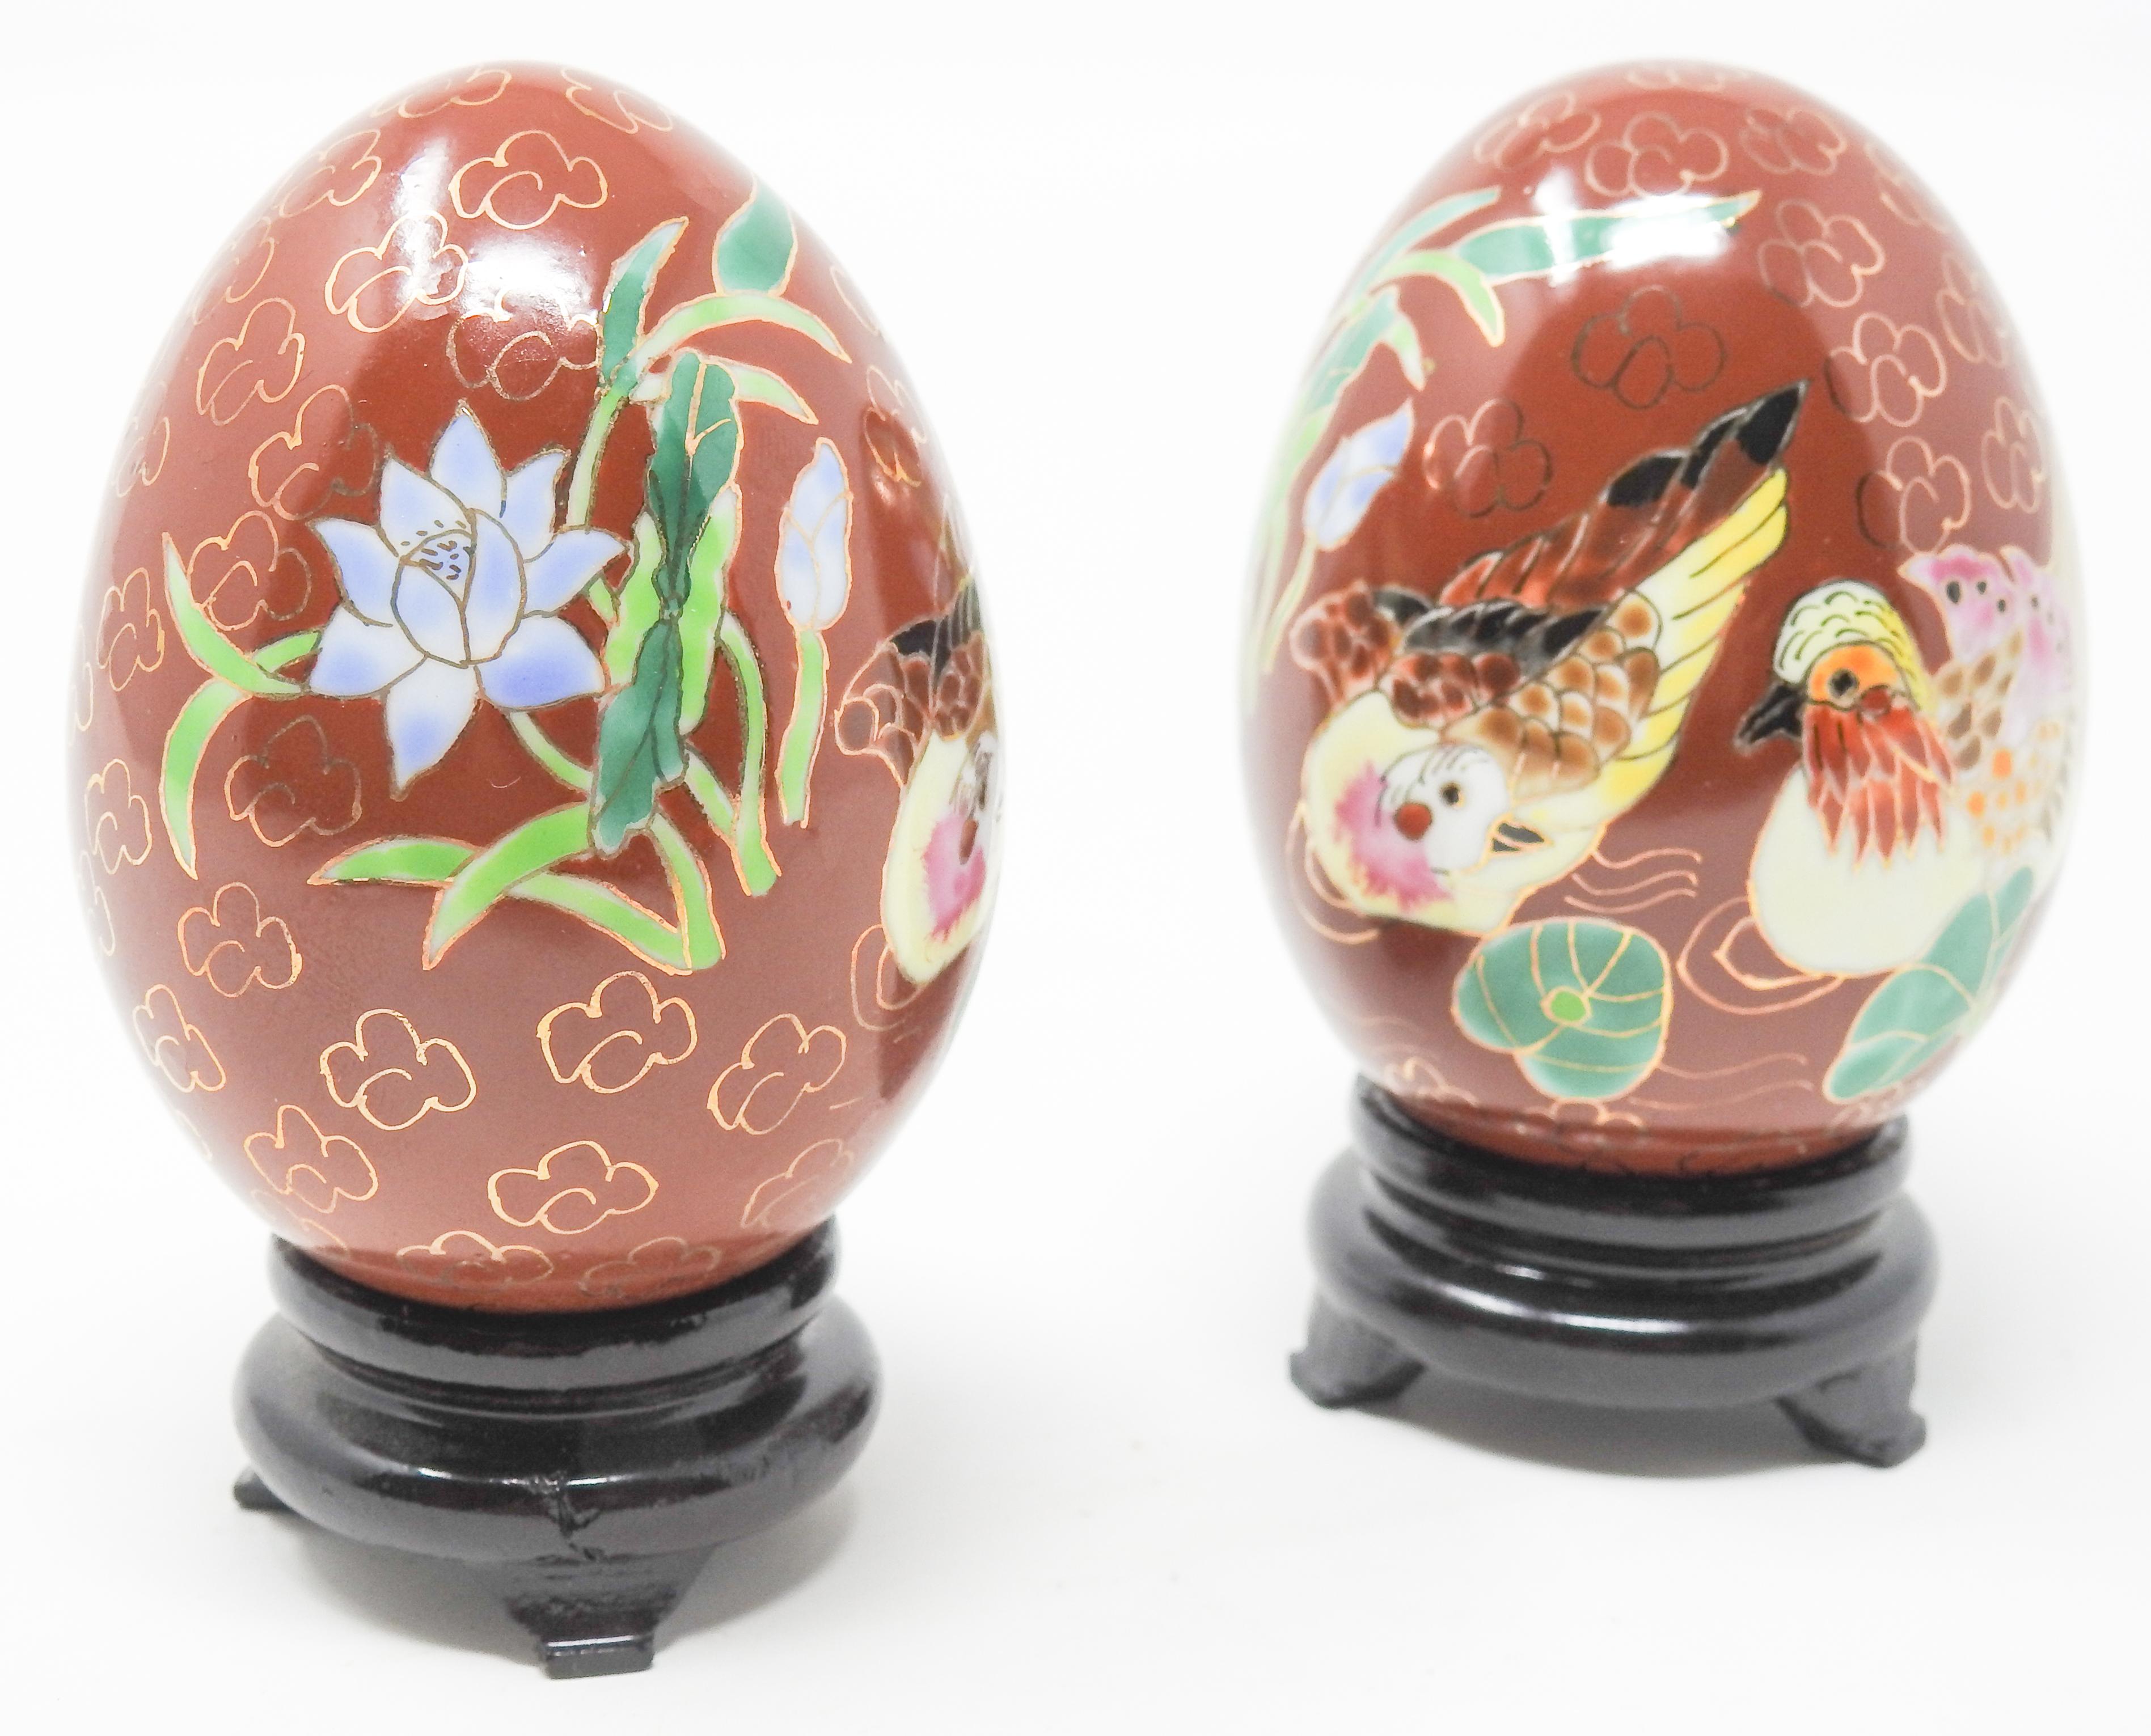 Offering this pair of Chinese chinoiserie enamelware eggs. The background is in a Chinese red, and has gold puffs on most of the surface. There are two hens depicted in vibrant colors, and to either side of them foliate and floral designs. The eggs